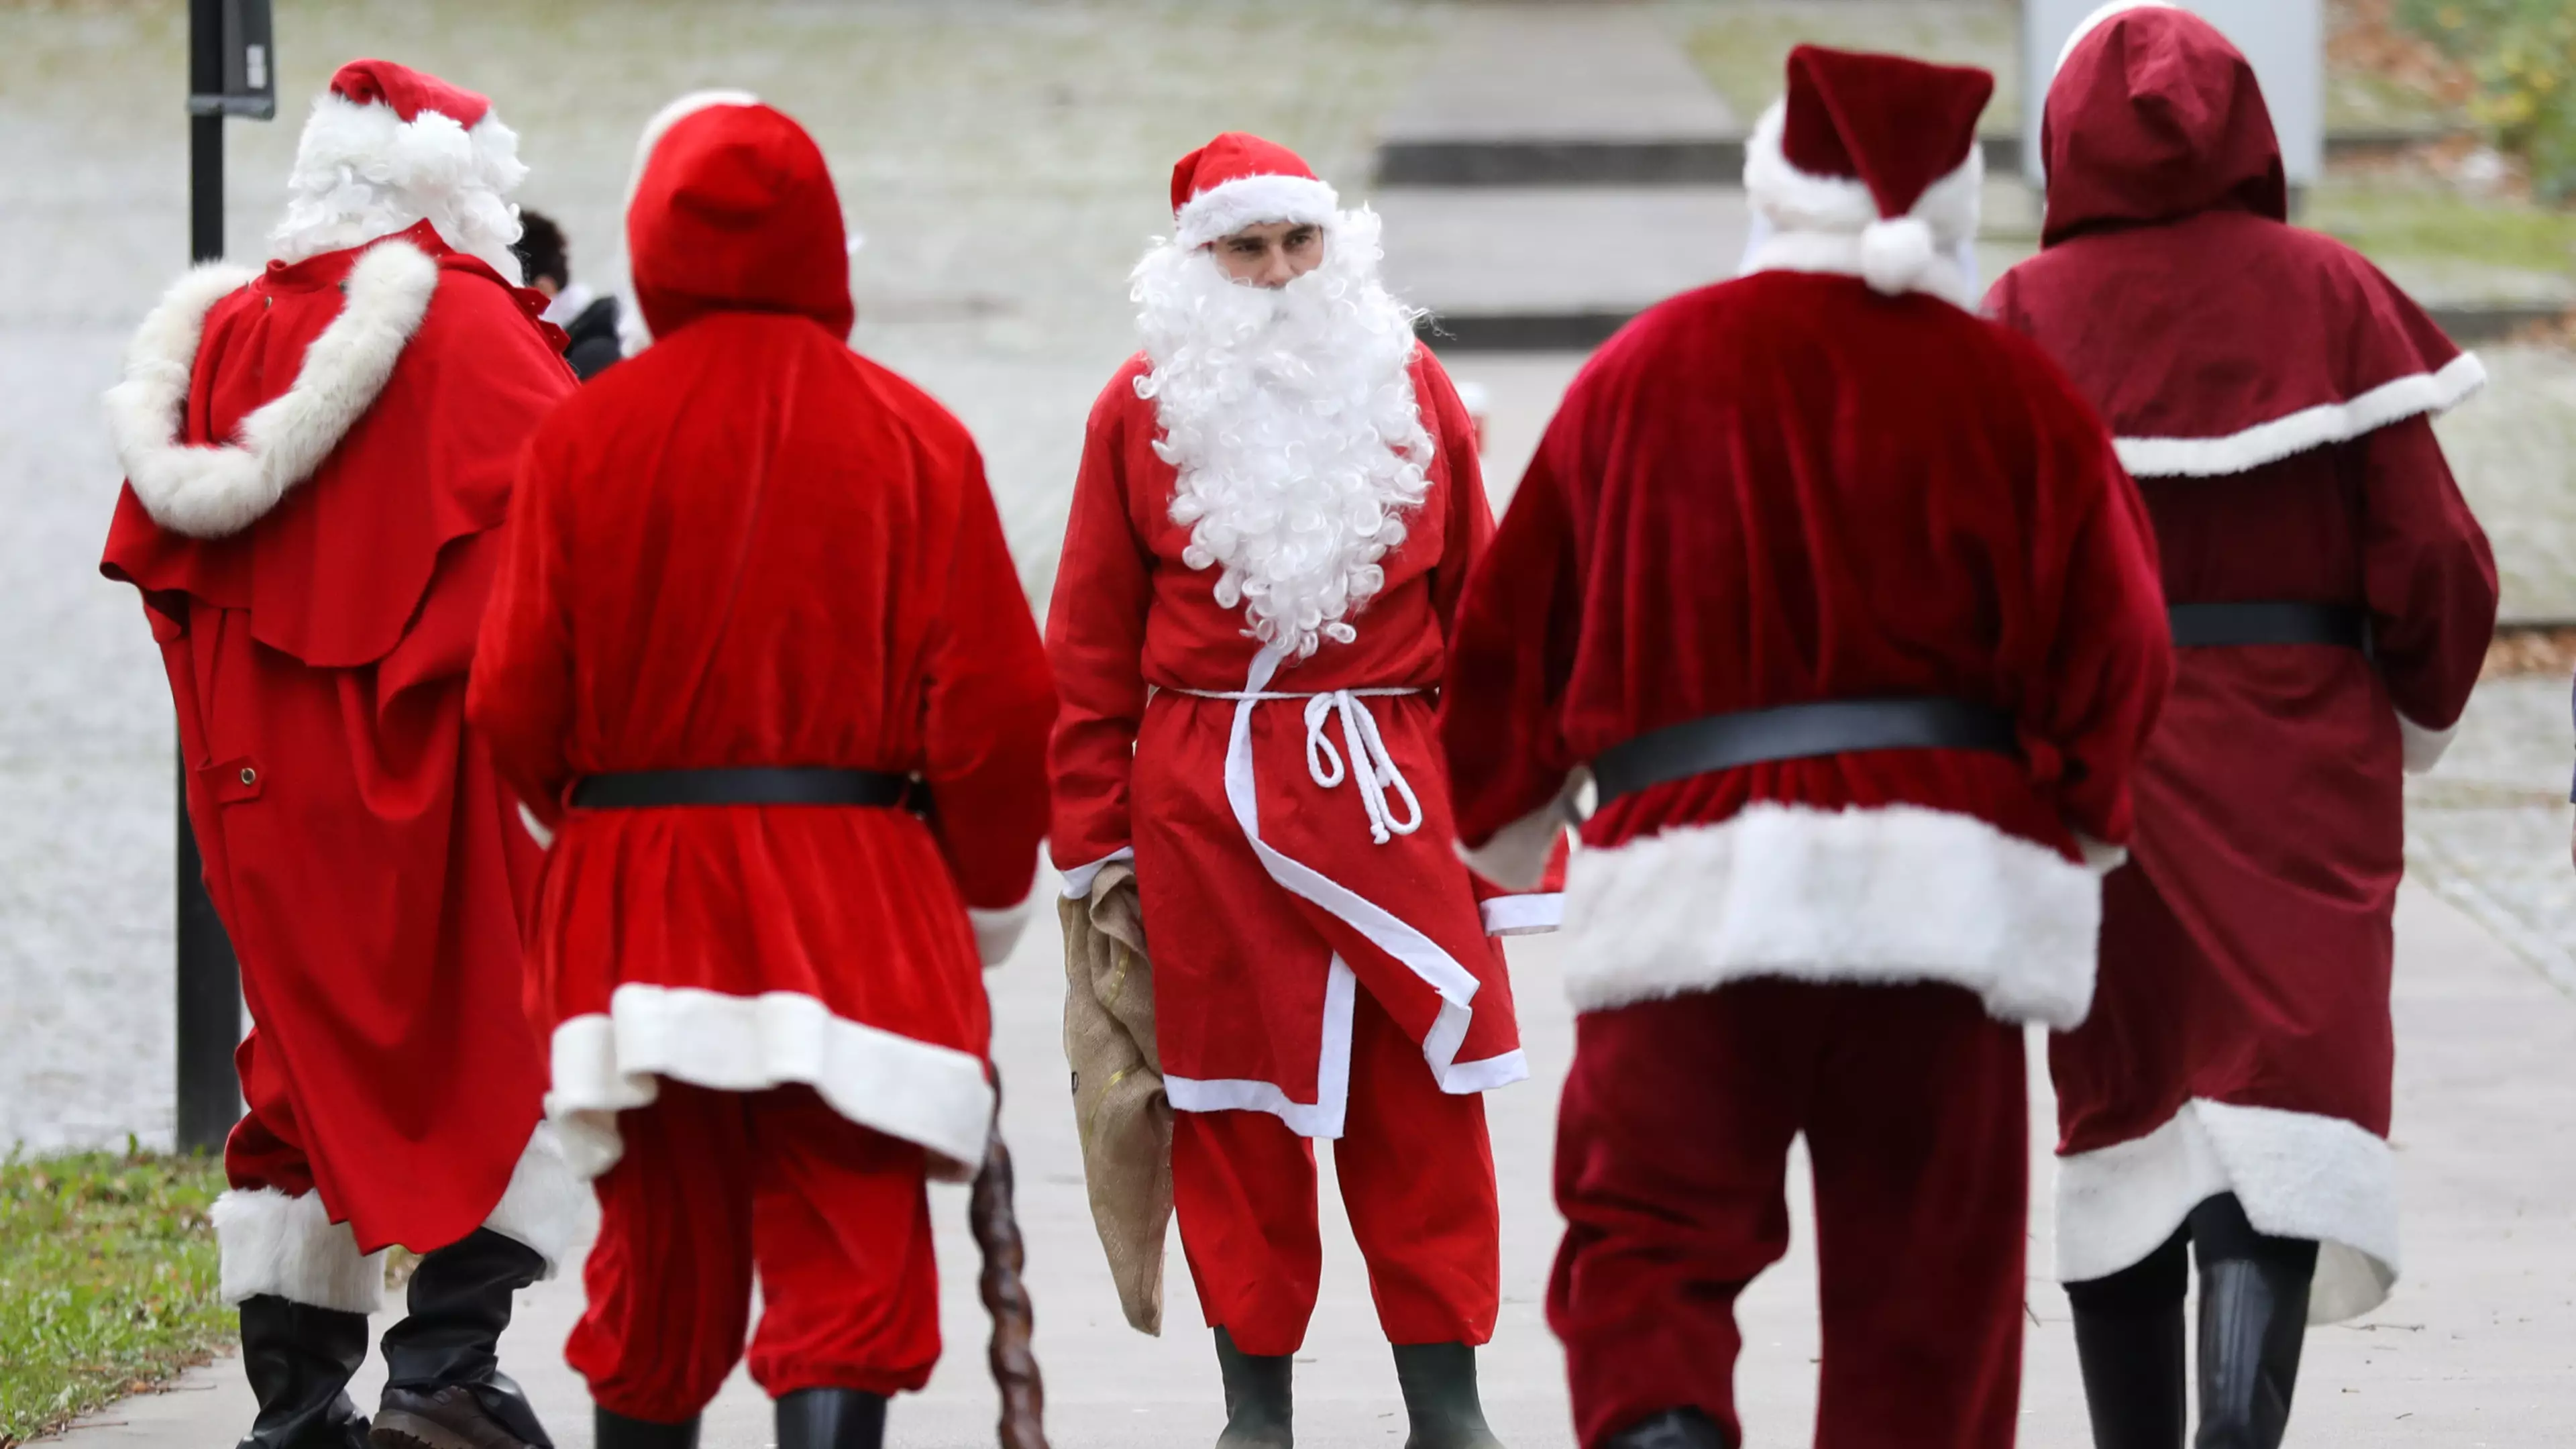 'Bad Santa' Rips Off Beard And Tells Kids To Get The F*** Out